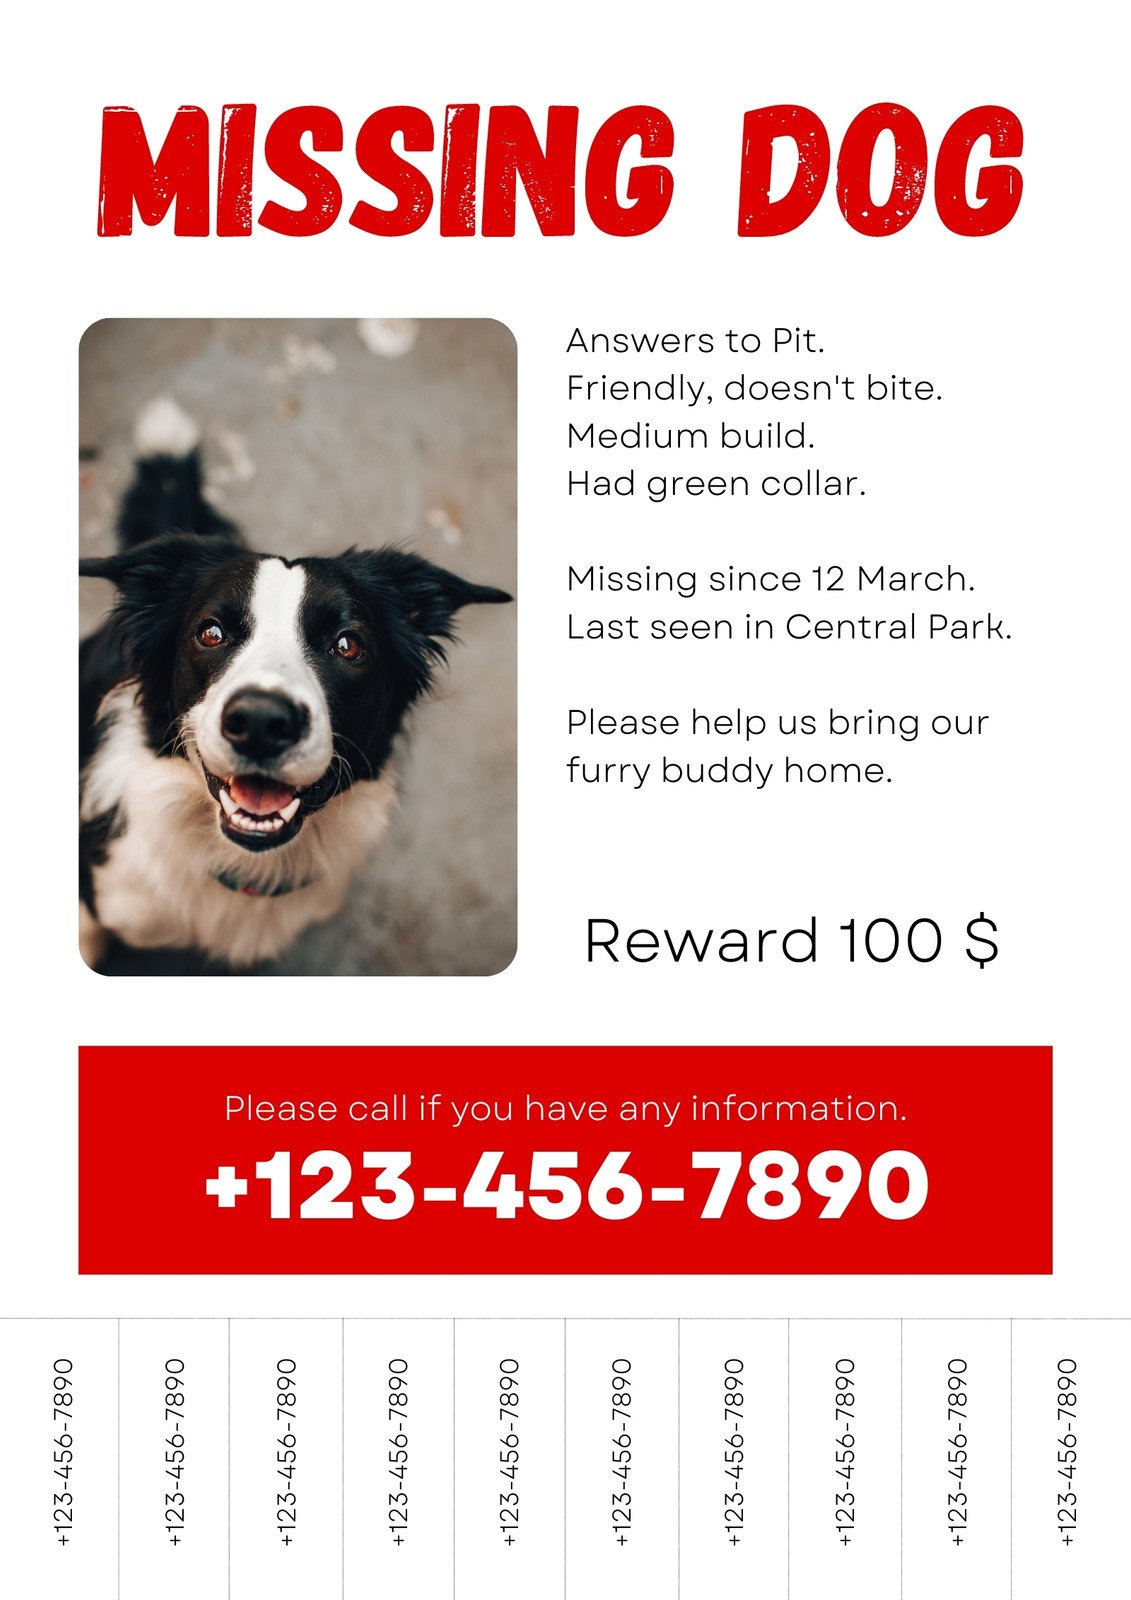 How To Make Missing Dog Posters